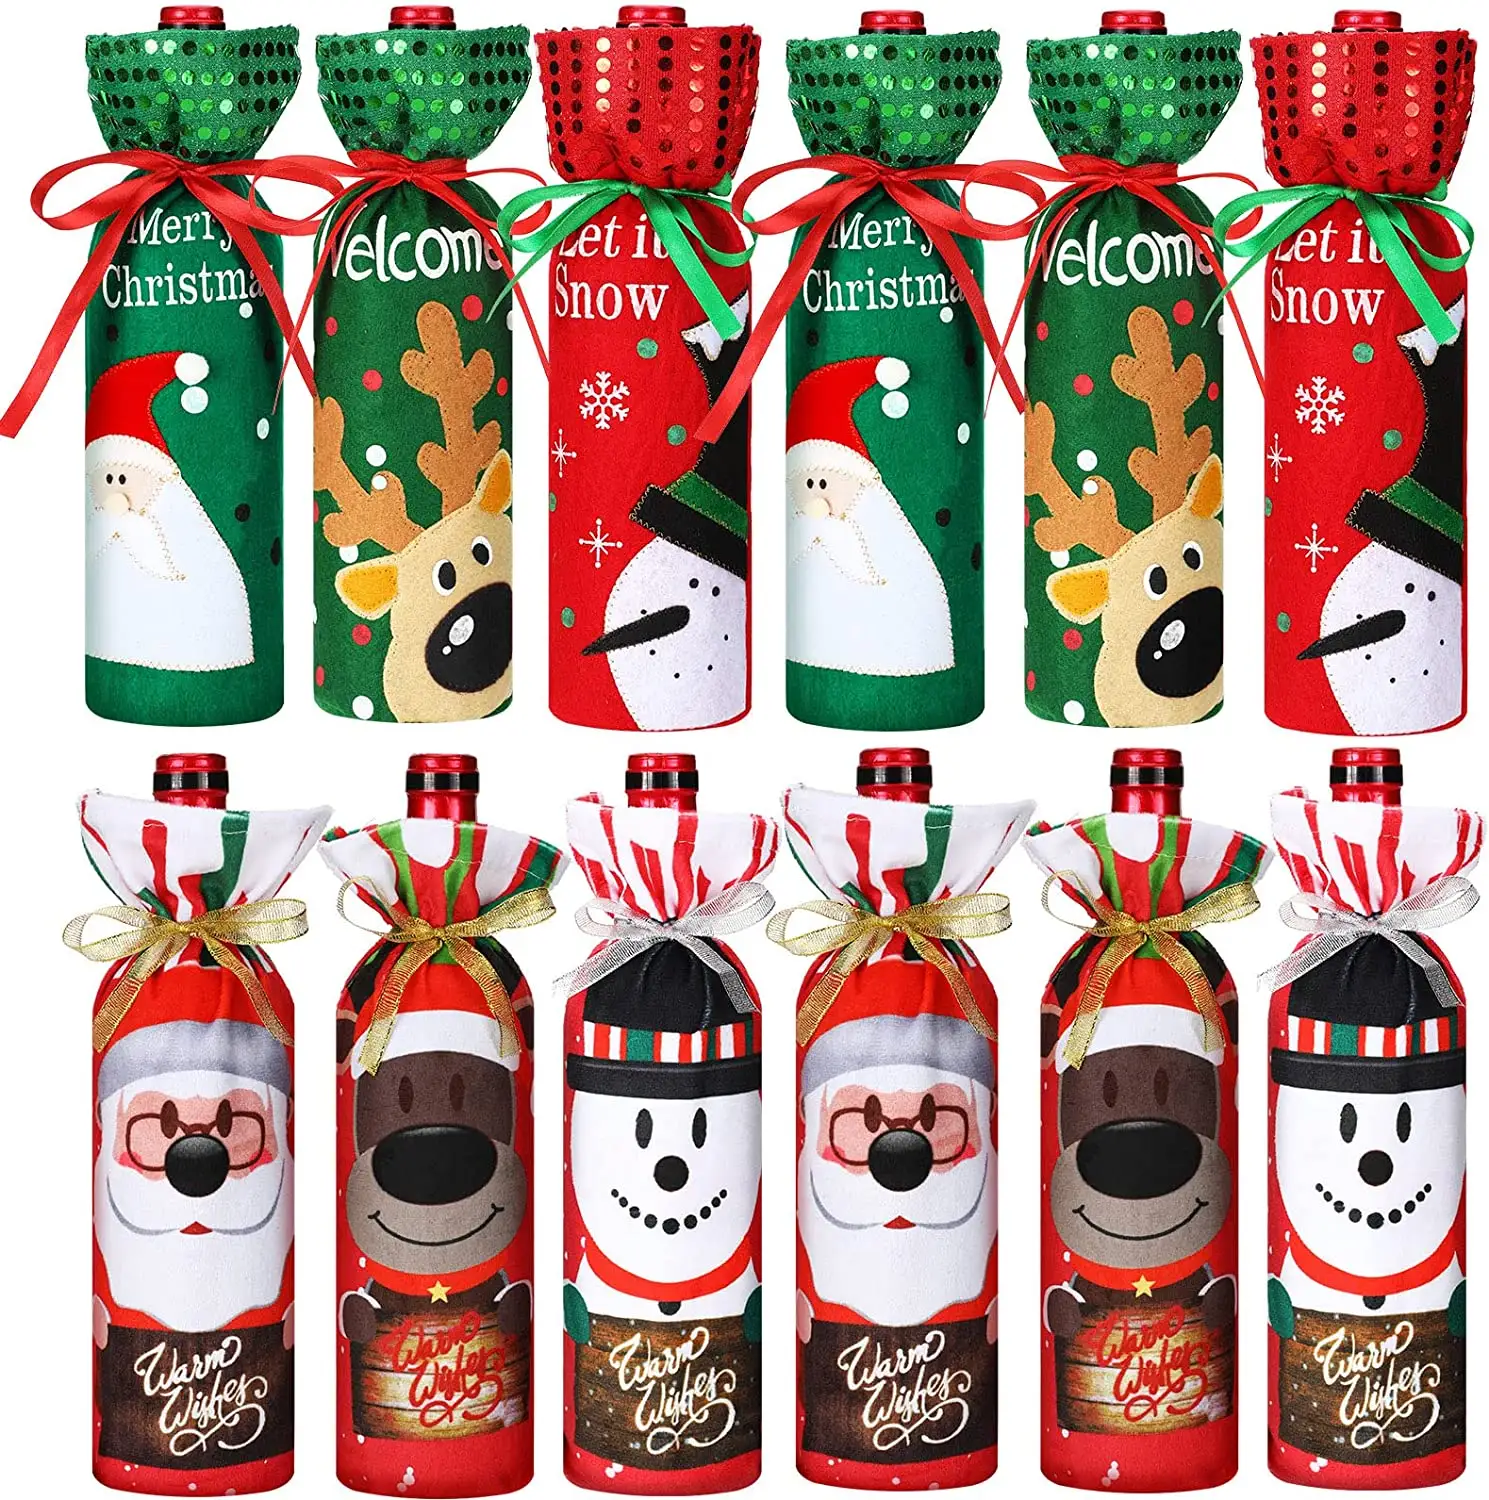 Decorative Christmas Wine Bottles Cover Bag Merry Christmas Decor For Home Party Christmas Ornaments Xmas Gift New Year's